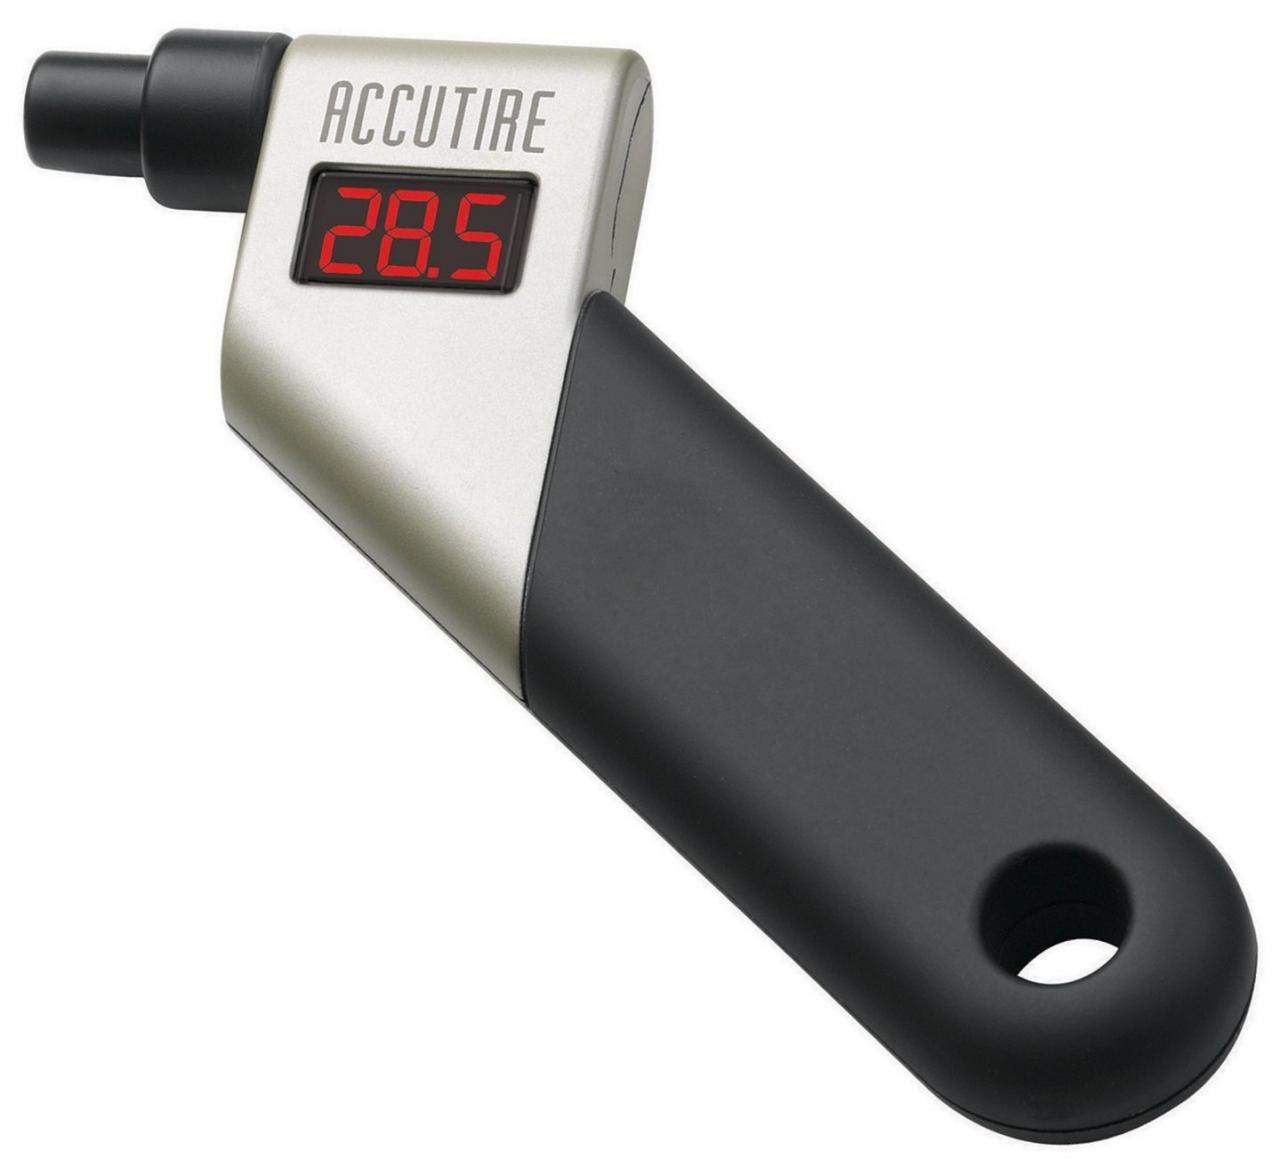 Accutire MS-4021B Digital Tire Pressure Gauge with Rugged Gauge LCD Display  5-150 PSI | jeannie zelos product reviews